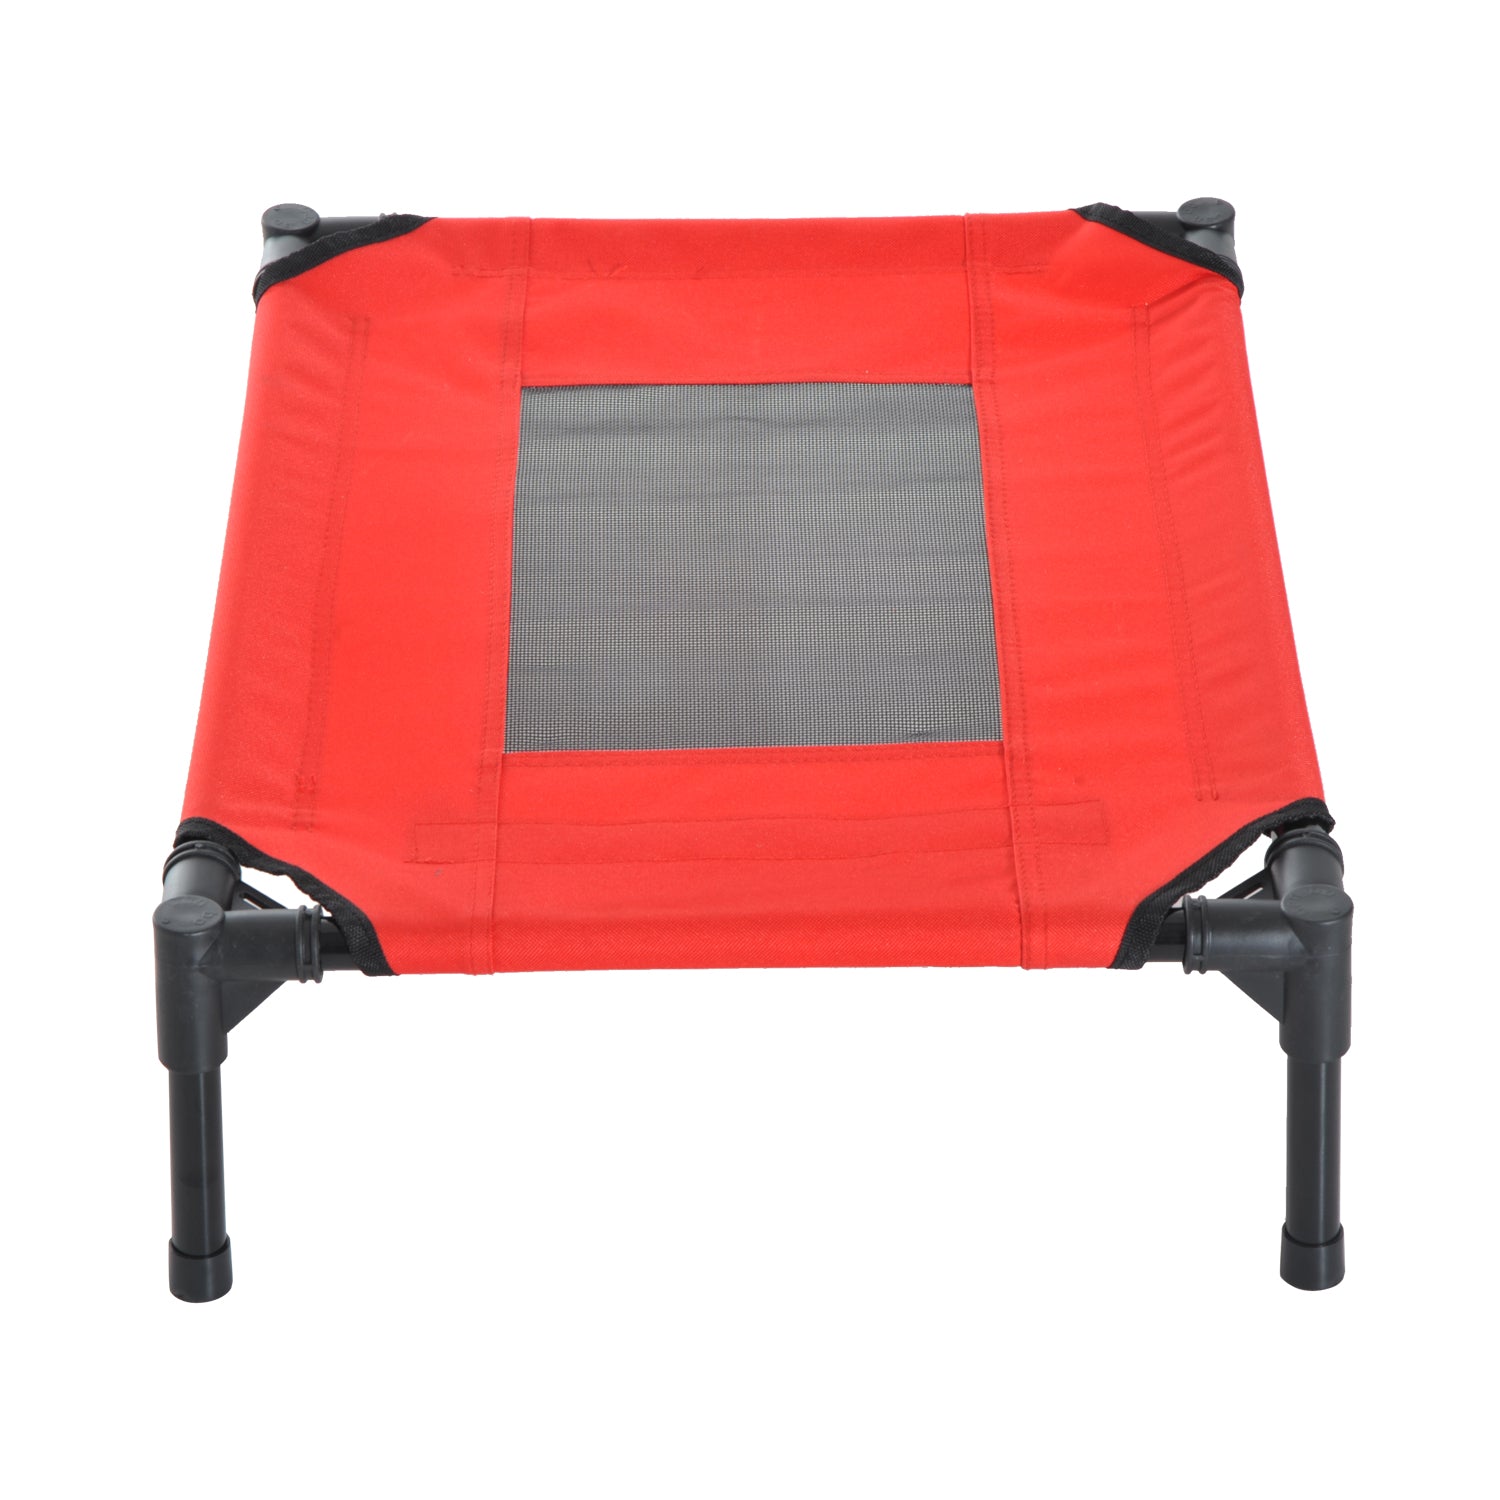 Elevated Pet Bed Portable Camping Raised Dog Bed w/ Metal Frame Black, Red (Small)